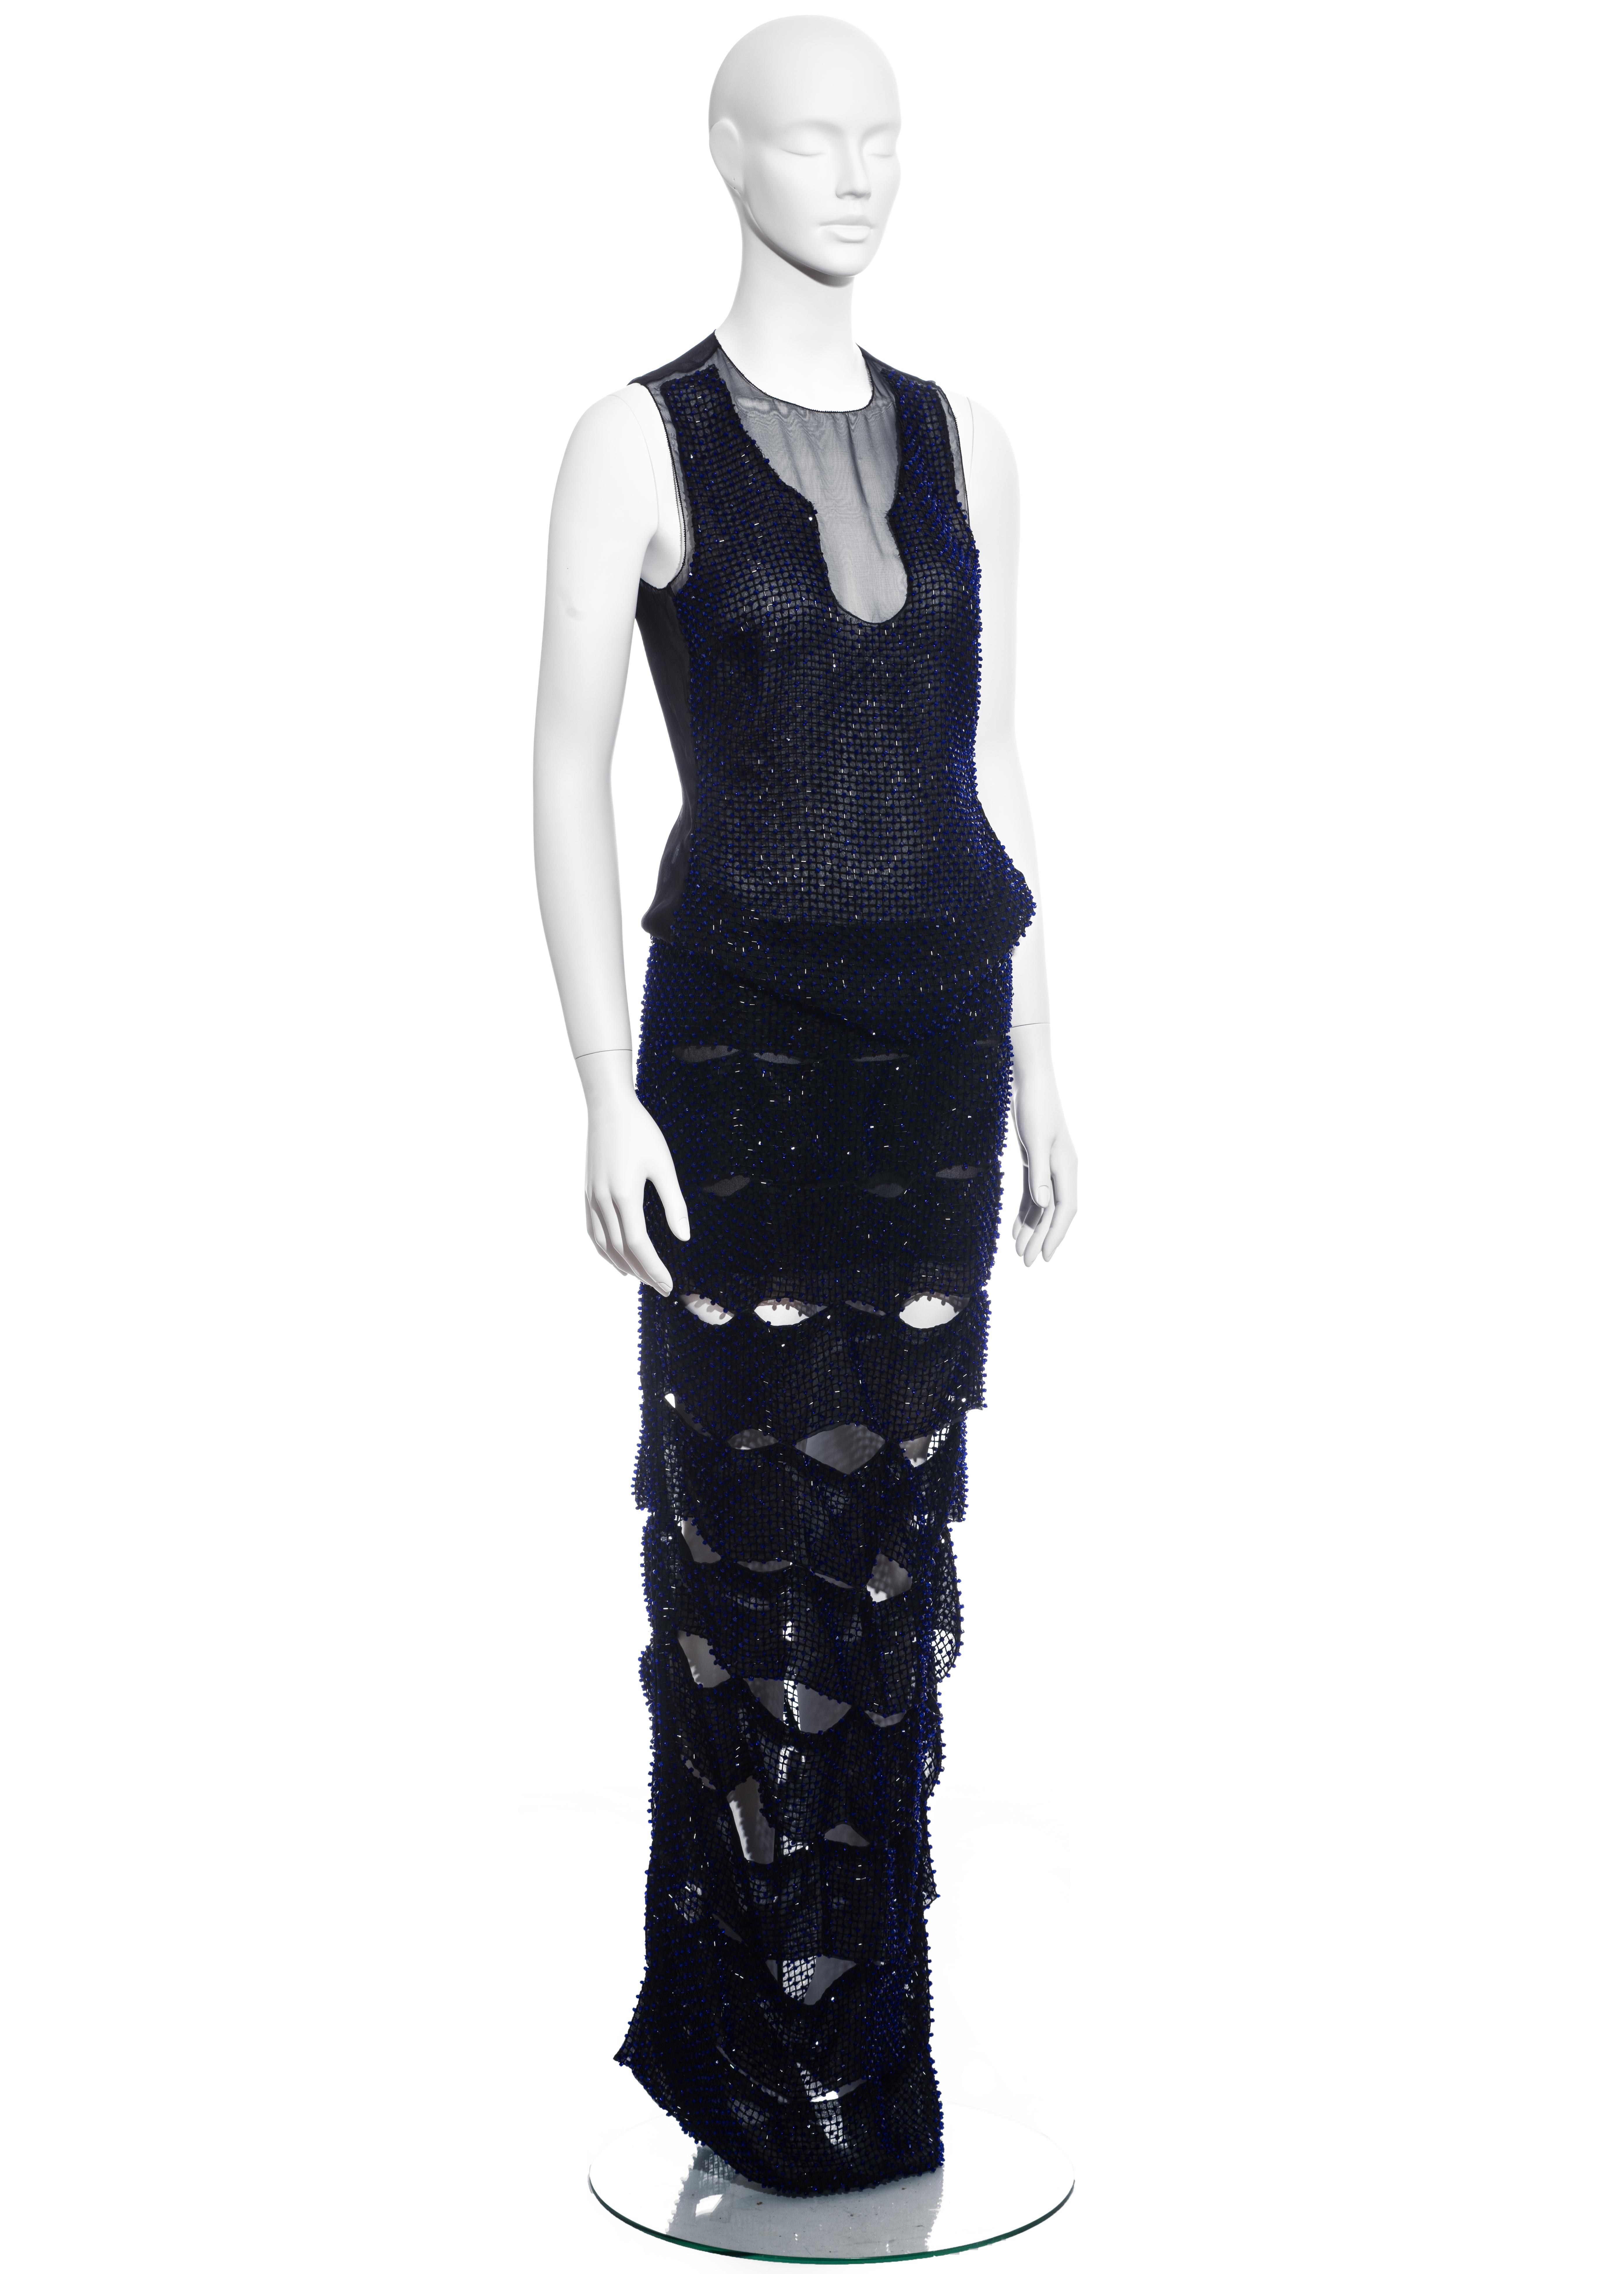 ▪ Evening dress comprising; skirt and top 
▪ Constructed with black silk organza and a lattice of blue glass beads
▪ Skirt formed from pieced strips 
▪ Matching bodice with sheer neckline and back
▪ IT 40 - FR 36 - UK 8 - US 4
▪ Spring-Summer 2013